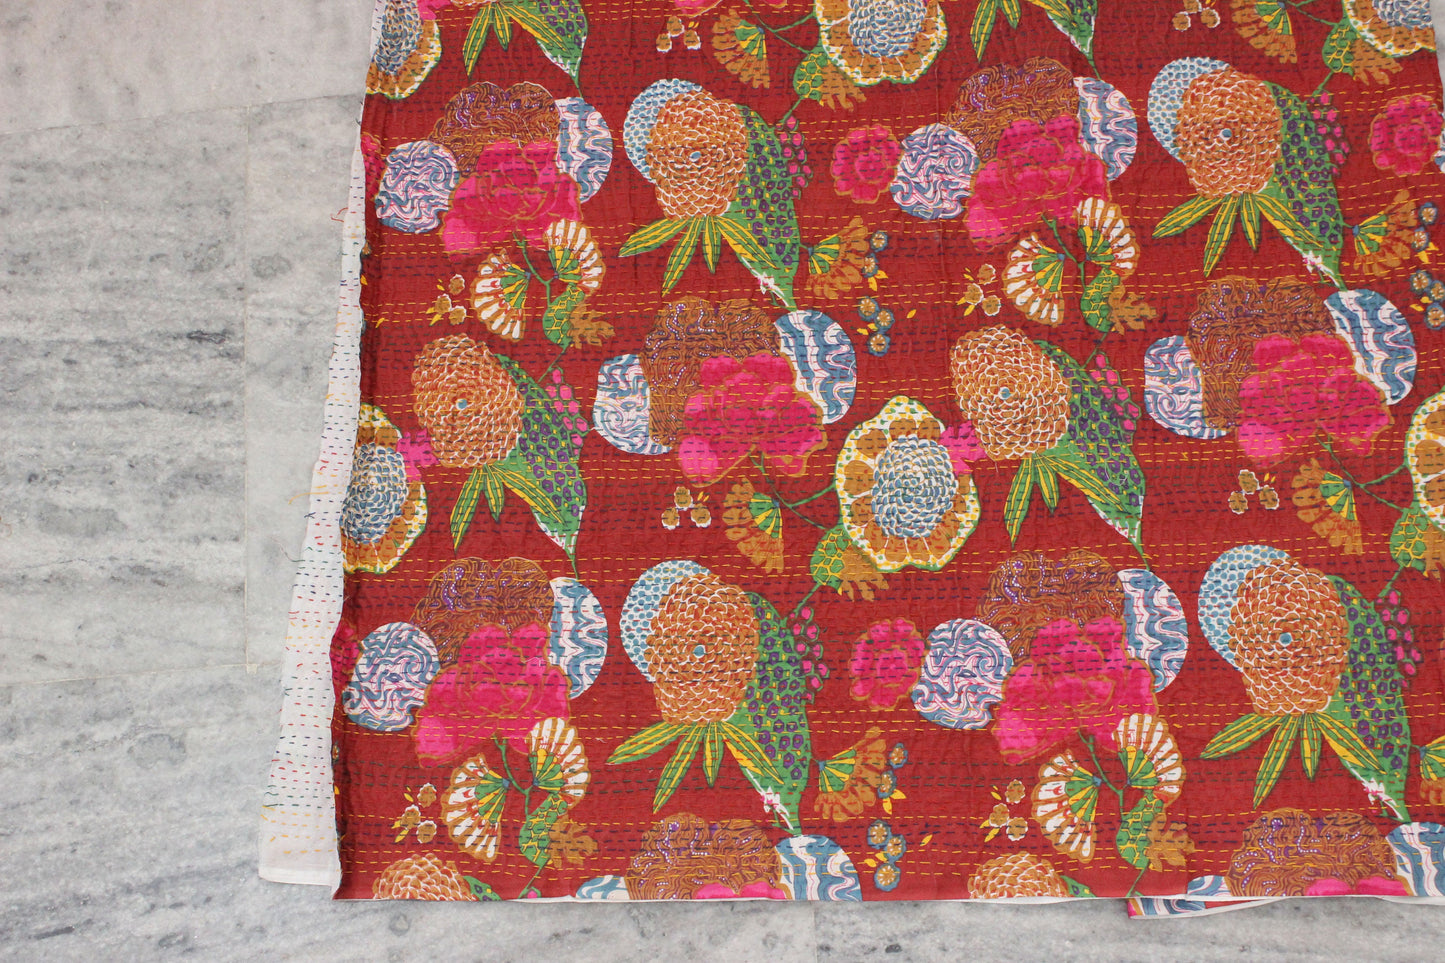 Maroon Boho Indian Fabric By The Yard Embroidered Indian Textile Fabric Embellished Fabric Floral Printed Home Decor Fabric Kantha Fabrics